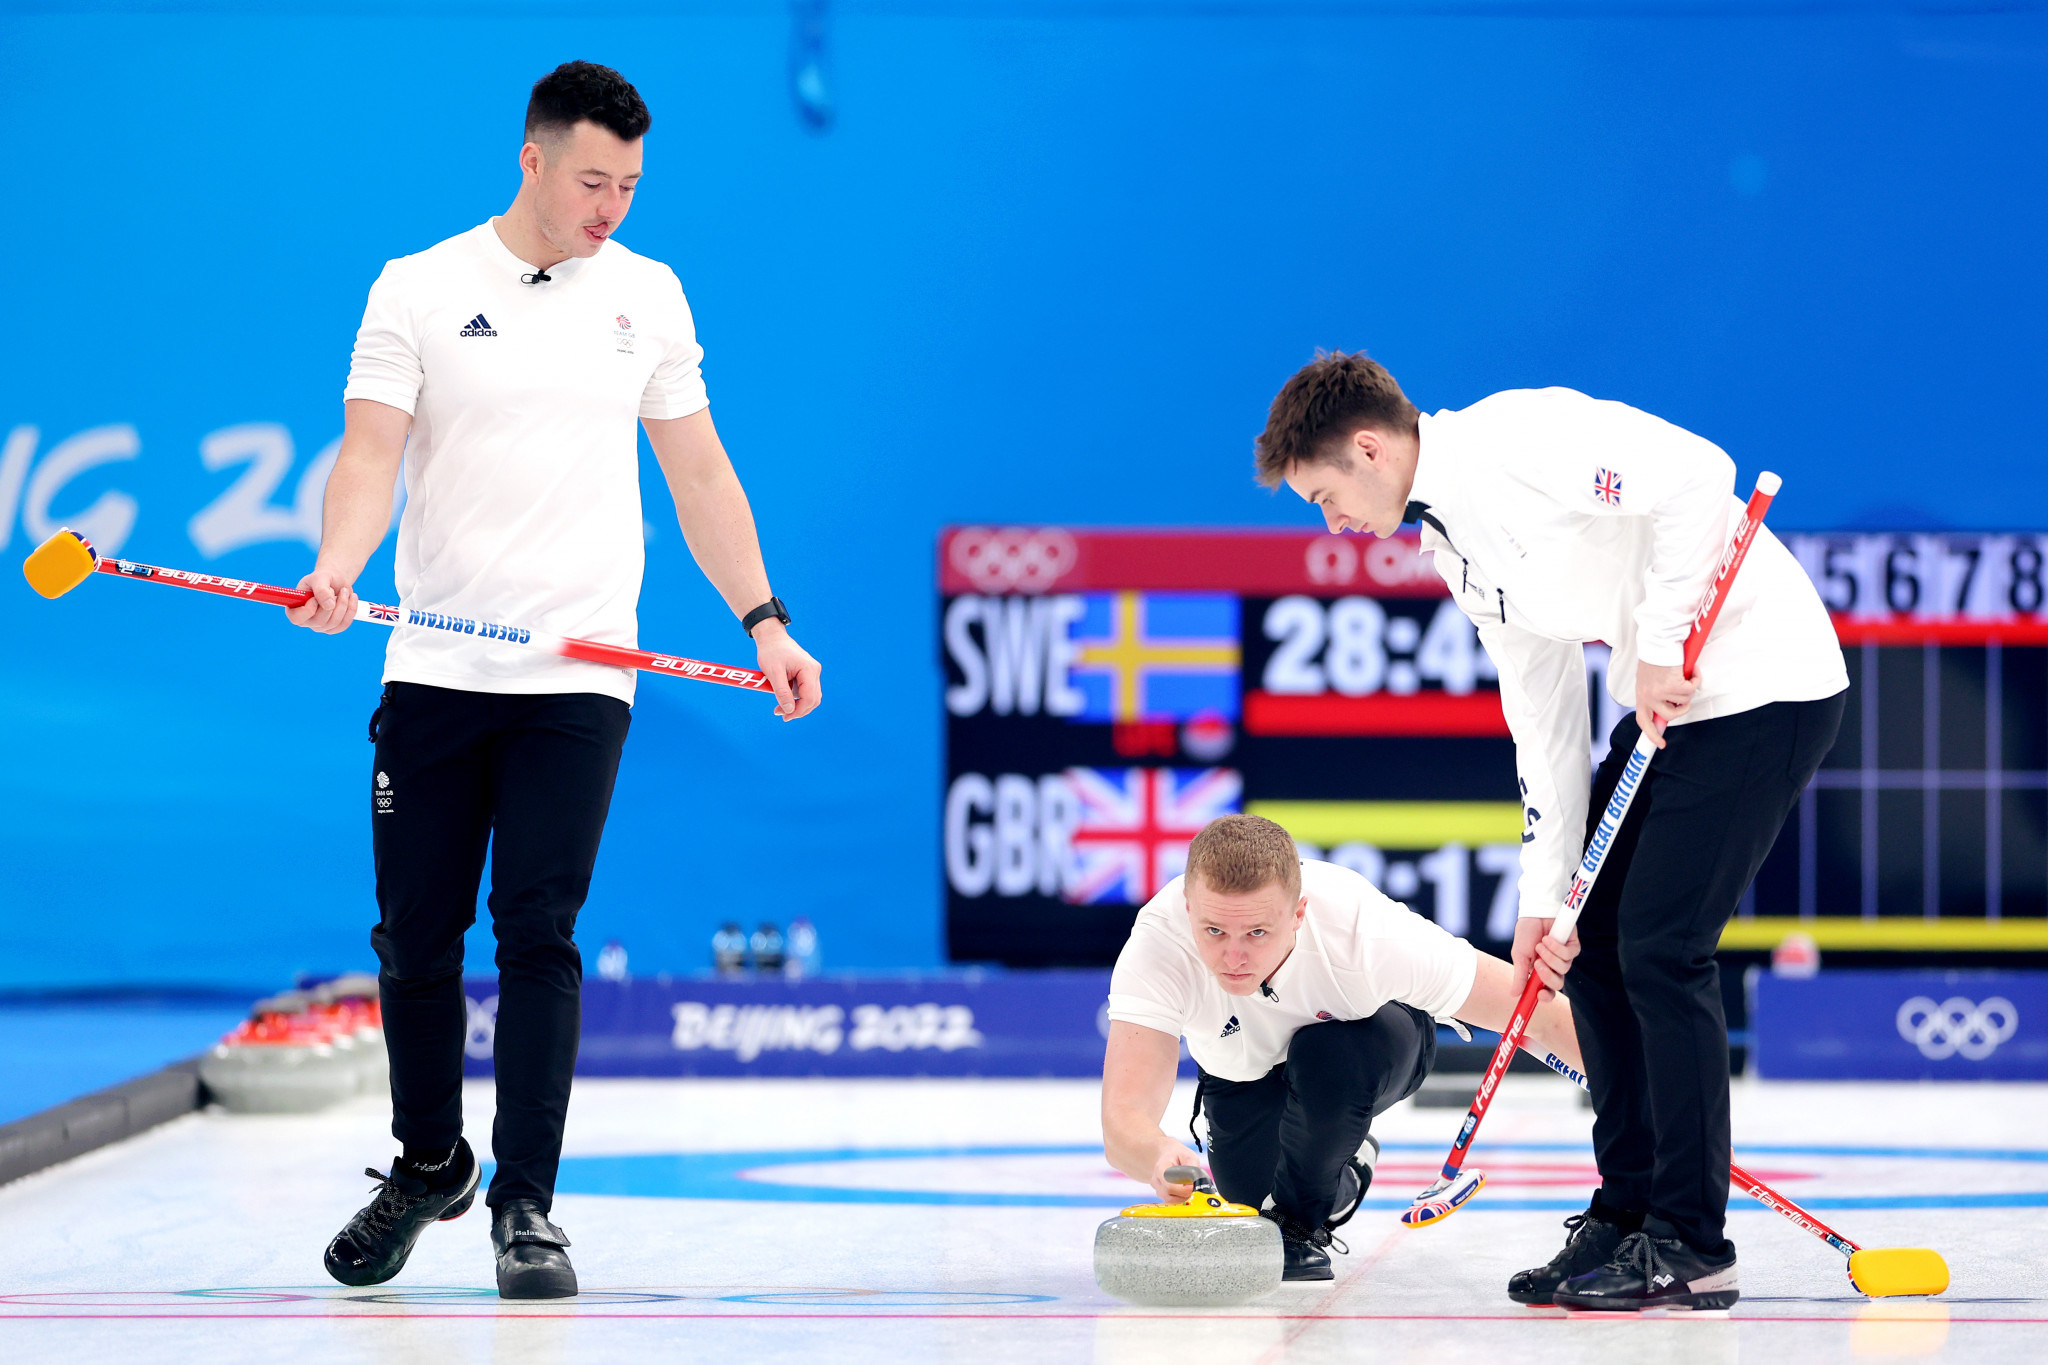 Britain reached the semi-finals of the men's curling tournament by ending Sweden's unbeaten record with an impressive 7-6 victory ©Getty Images